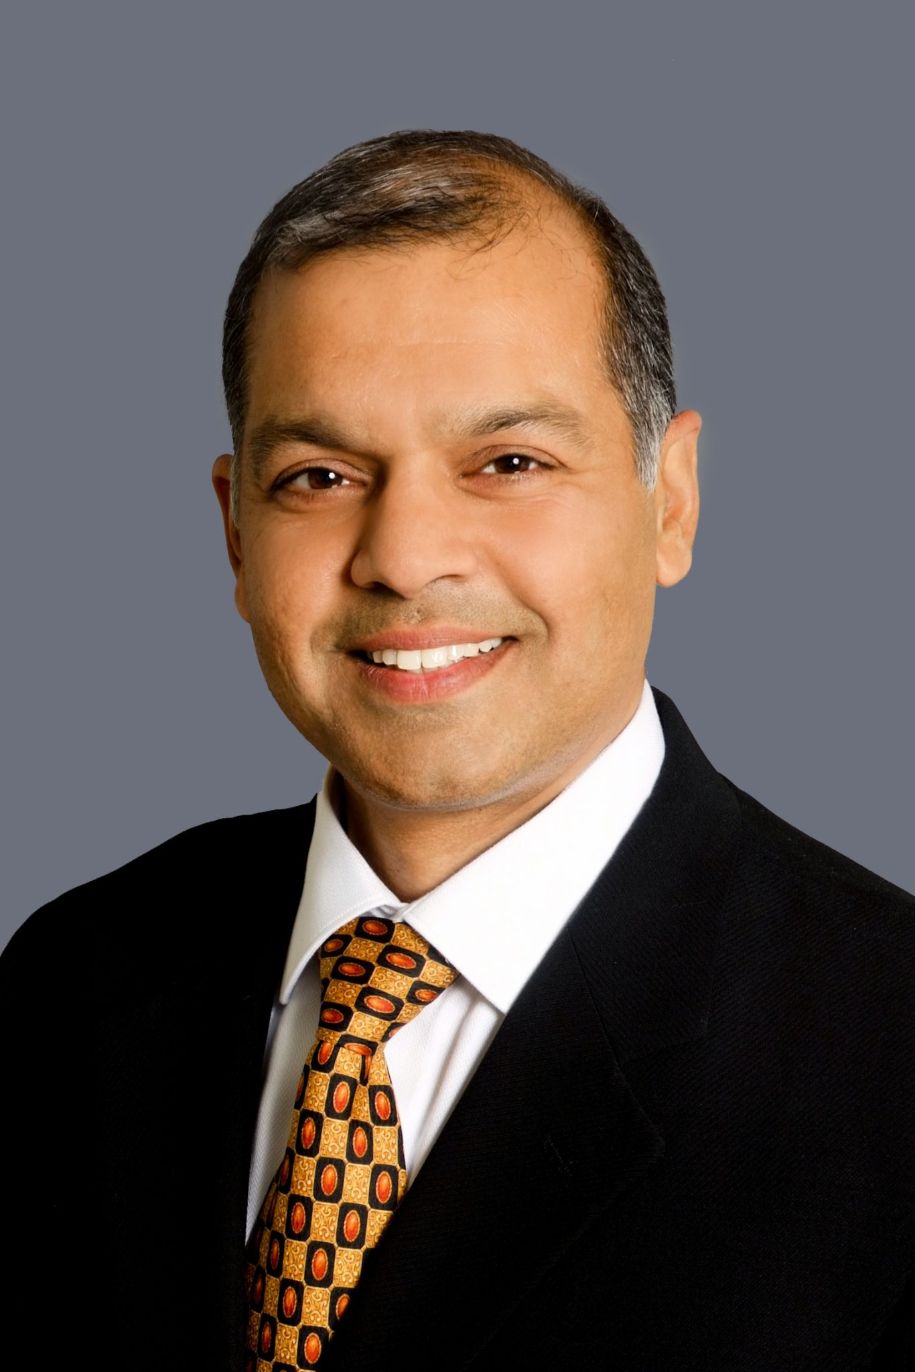 Headshot of Venkat Bahl wearing a suit and smiling.